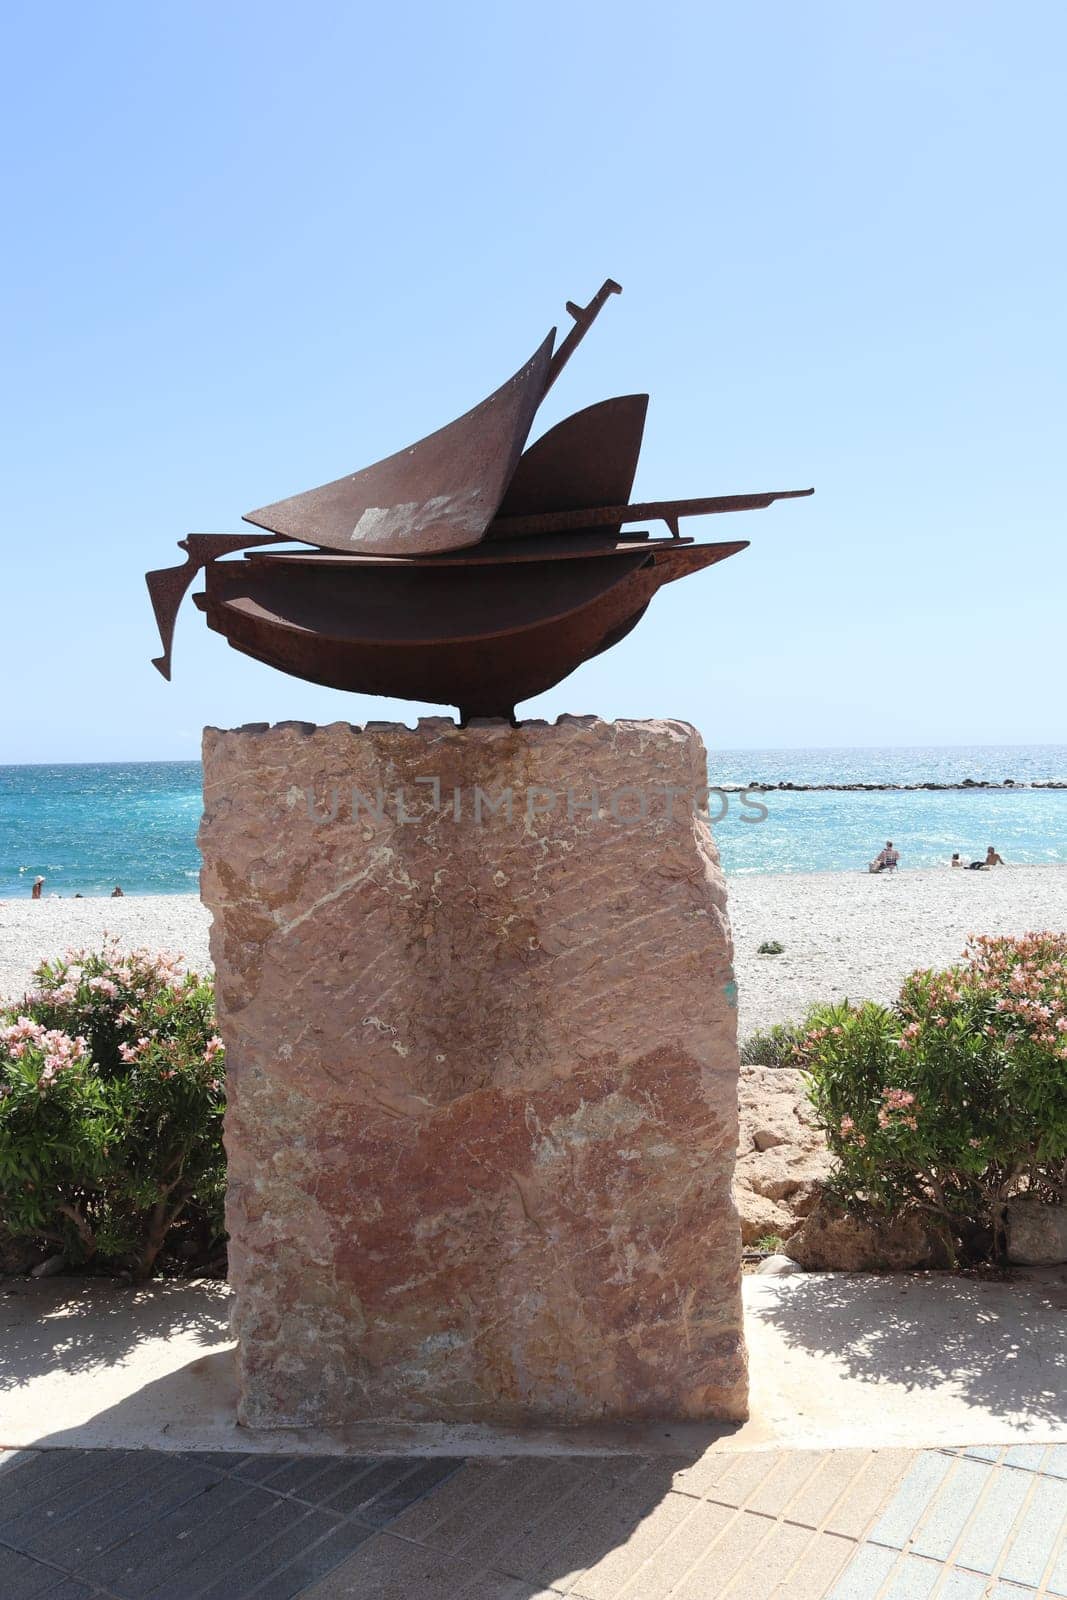 Sculpture on the seafront of Altea, Alicante Spain